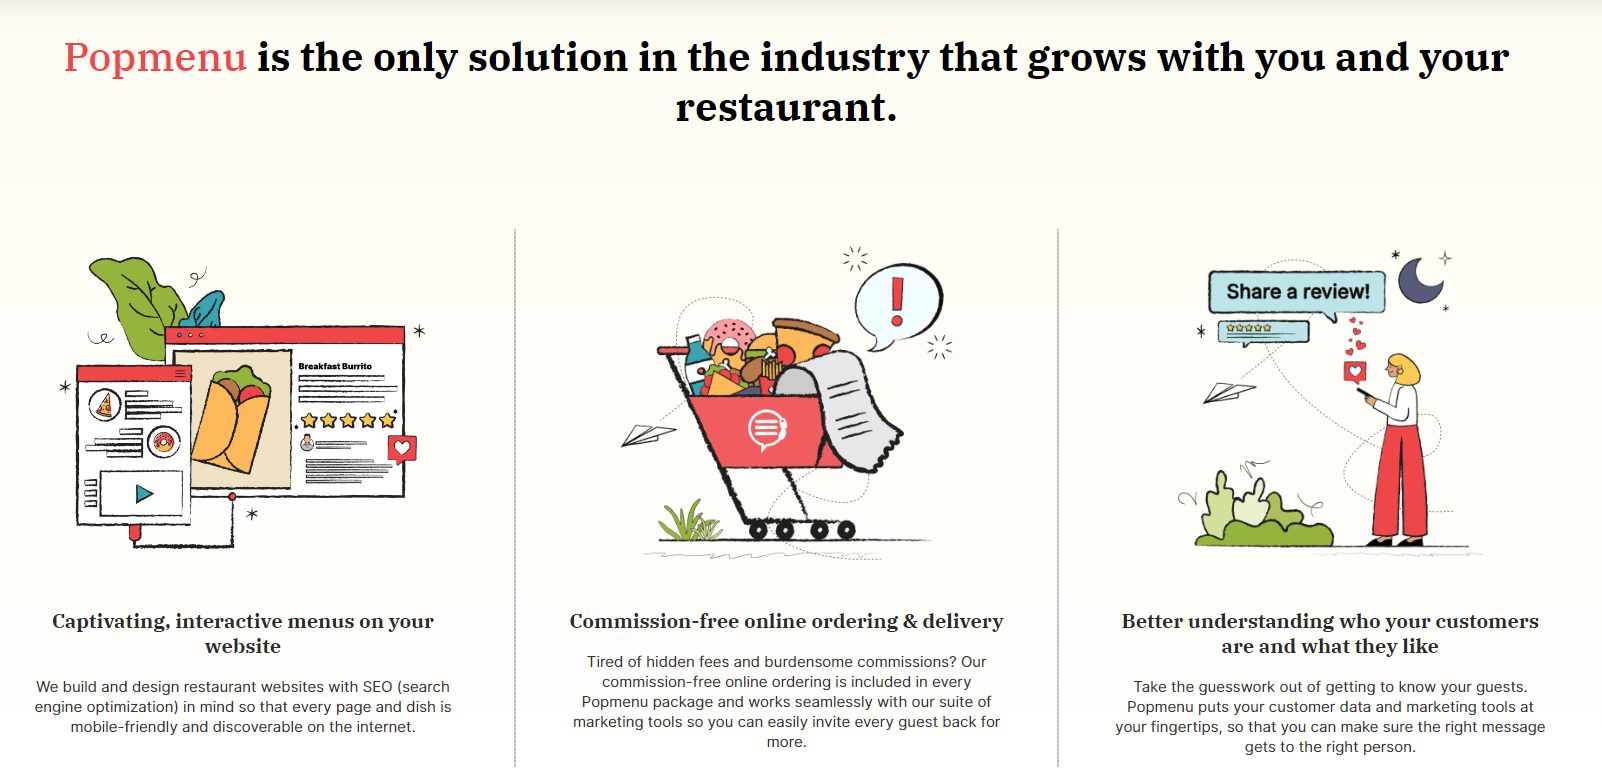 Popmenu is the only solution in the industry that grows with you and your restaurant.